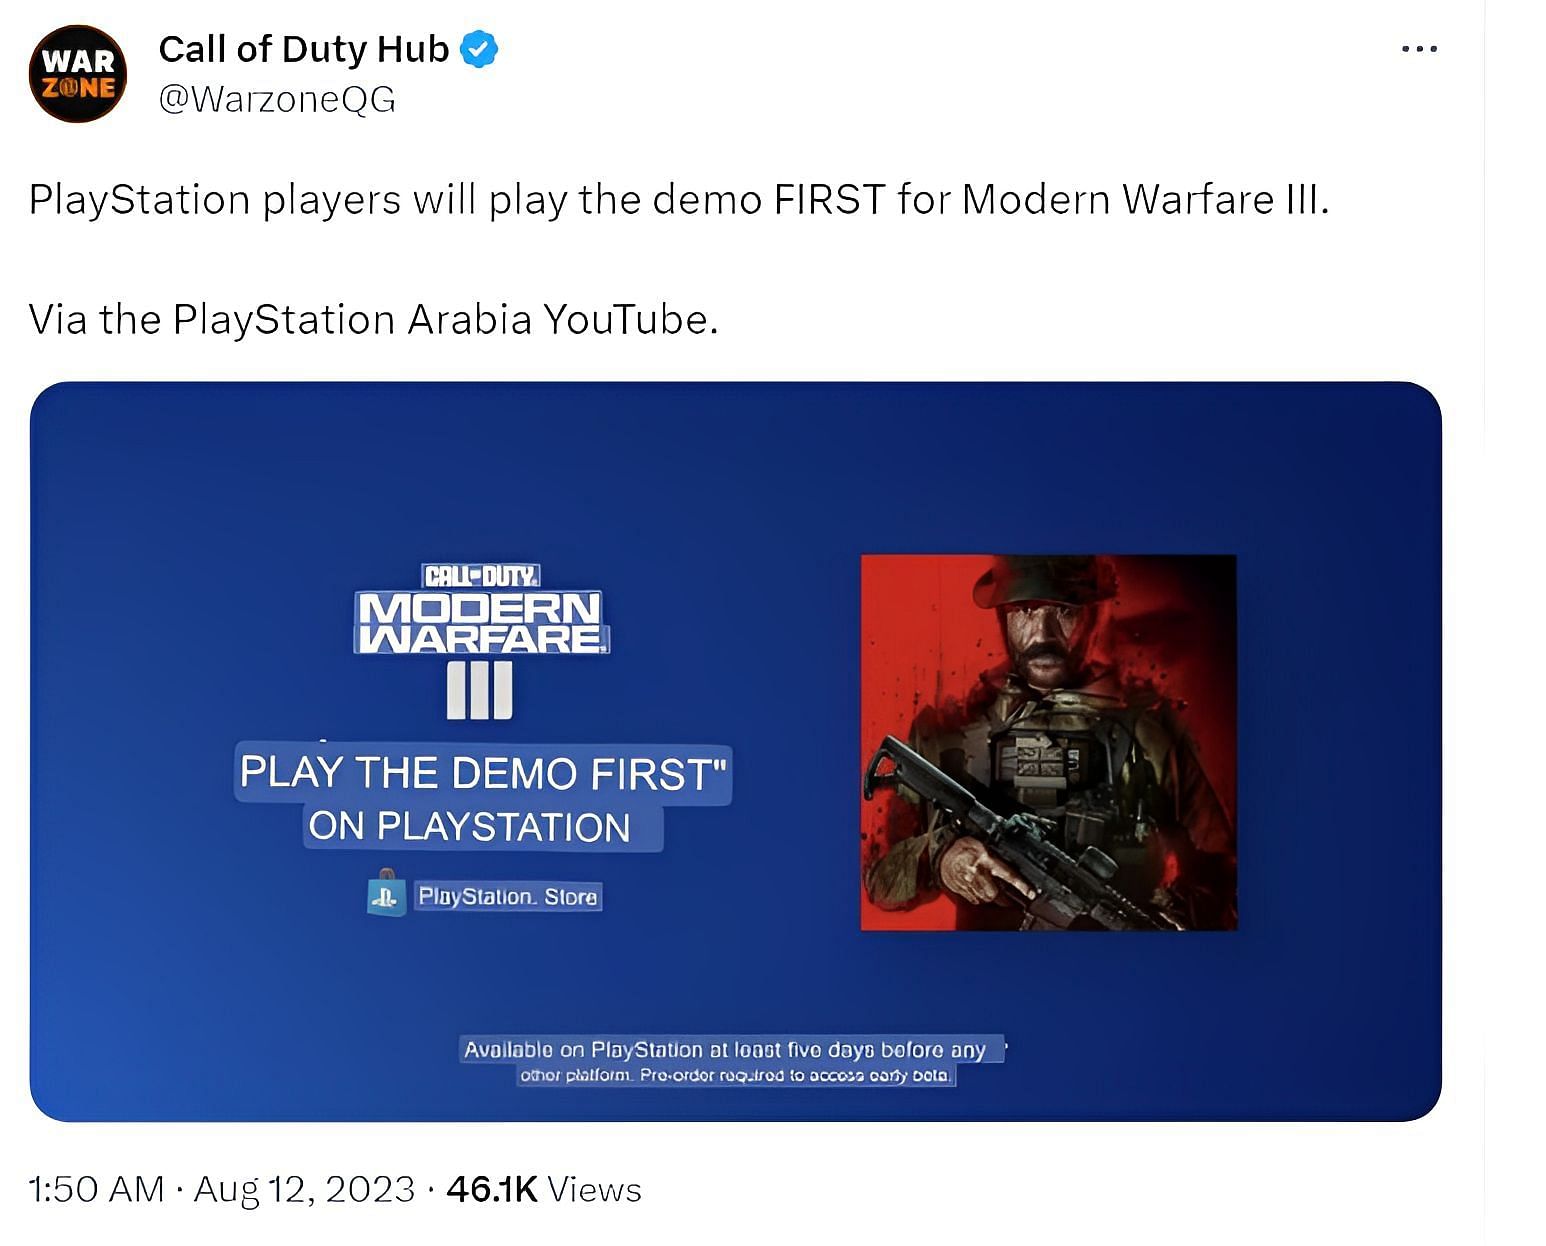 Modern Warfare III beta: when you can play on which platforms